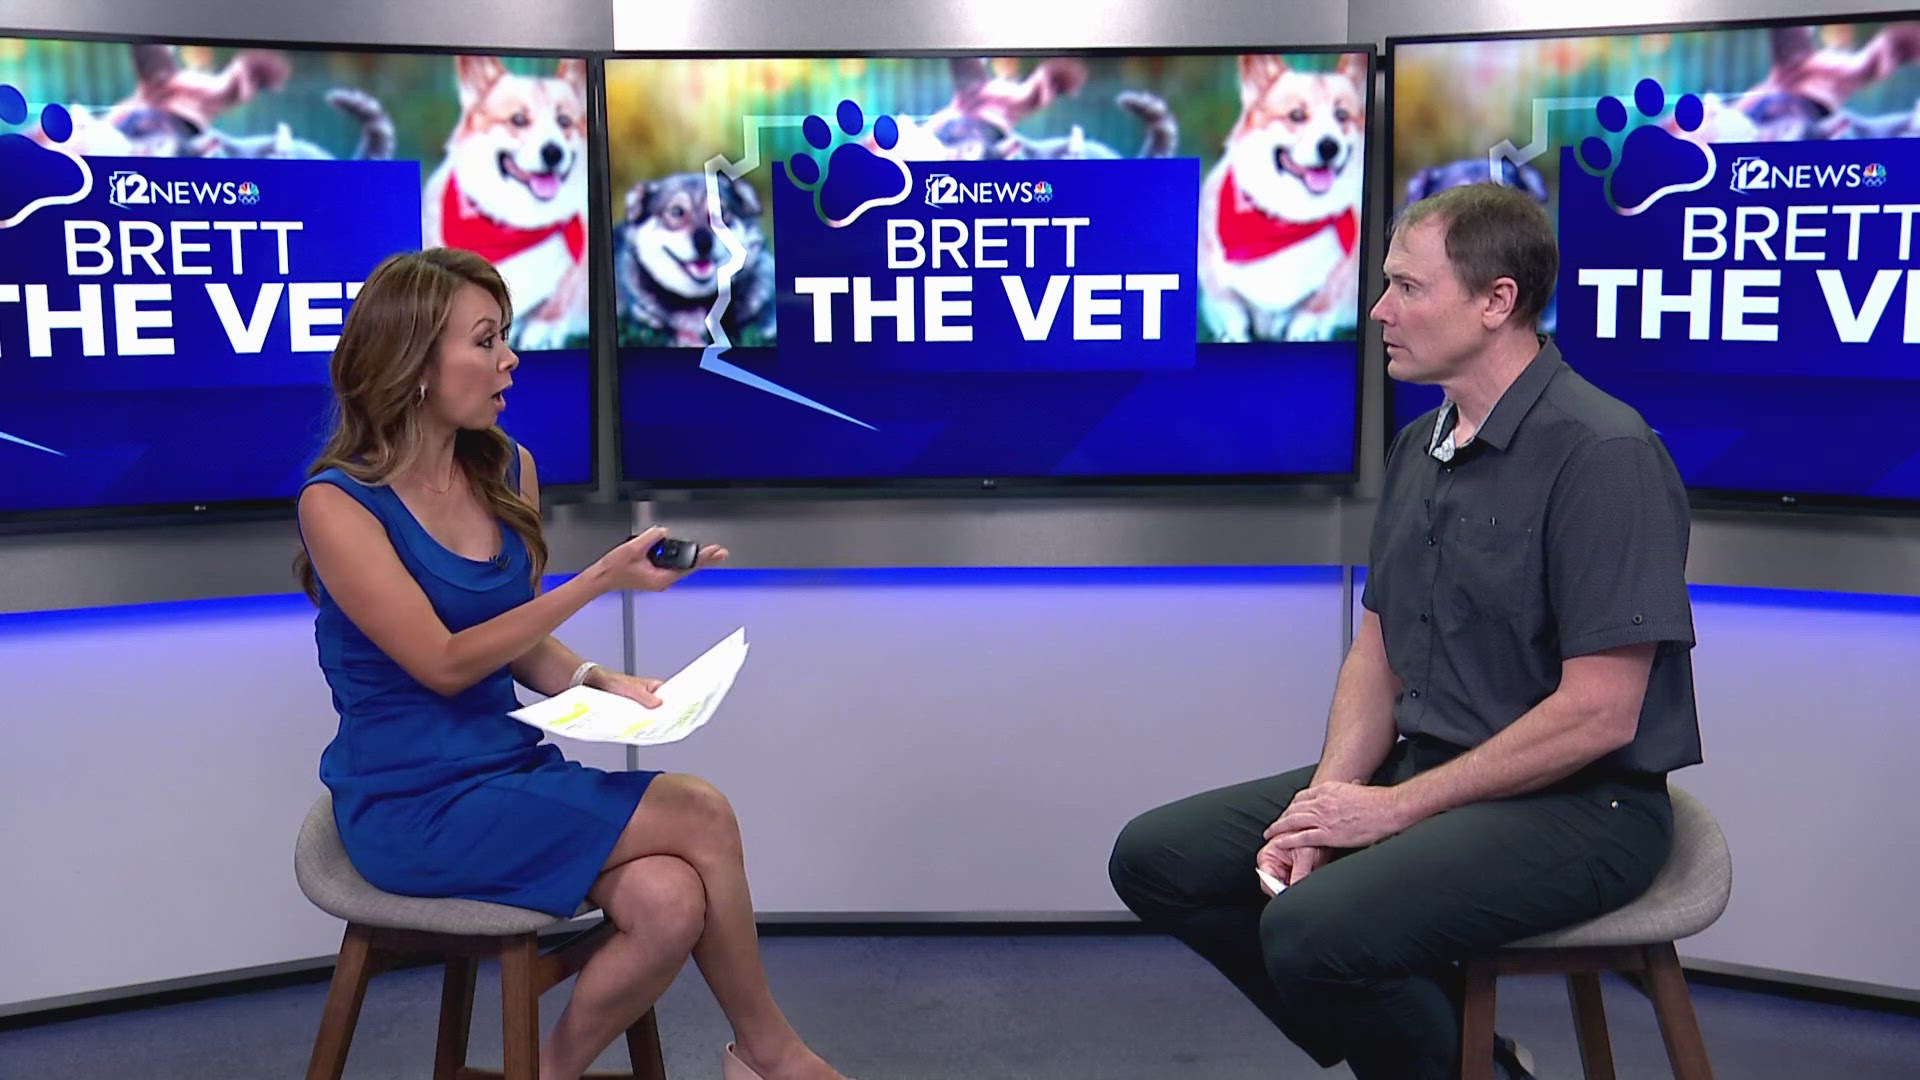 Brett the Vet is back on 12News to discuss the ways to keep your furry animals calm during the holiday and monsoon season.